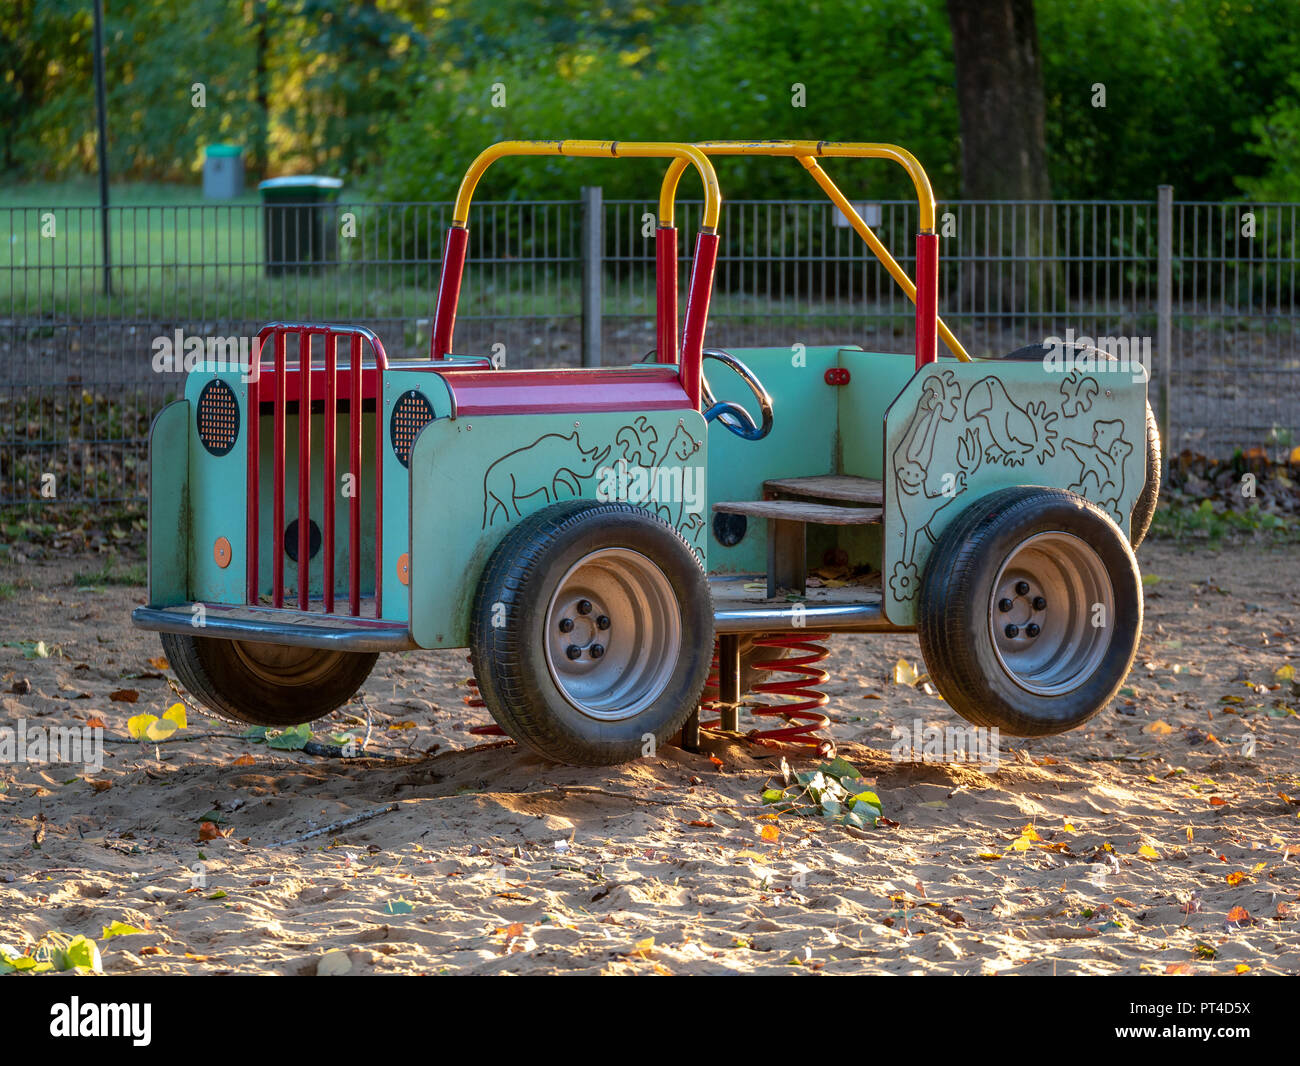 Close Up Image Of Swing Car At Playground In Sandpit Stock Photo Alamy